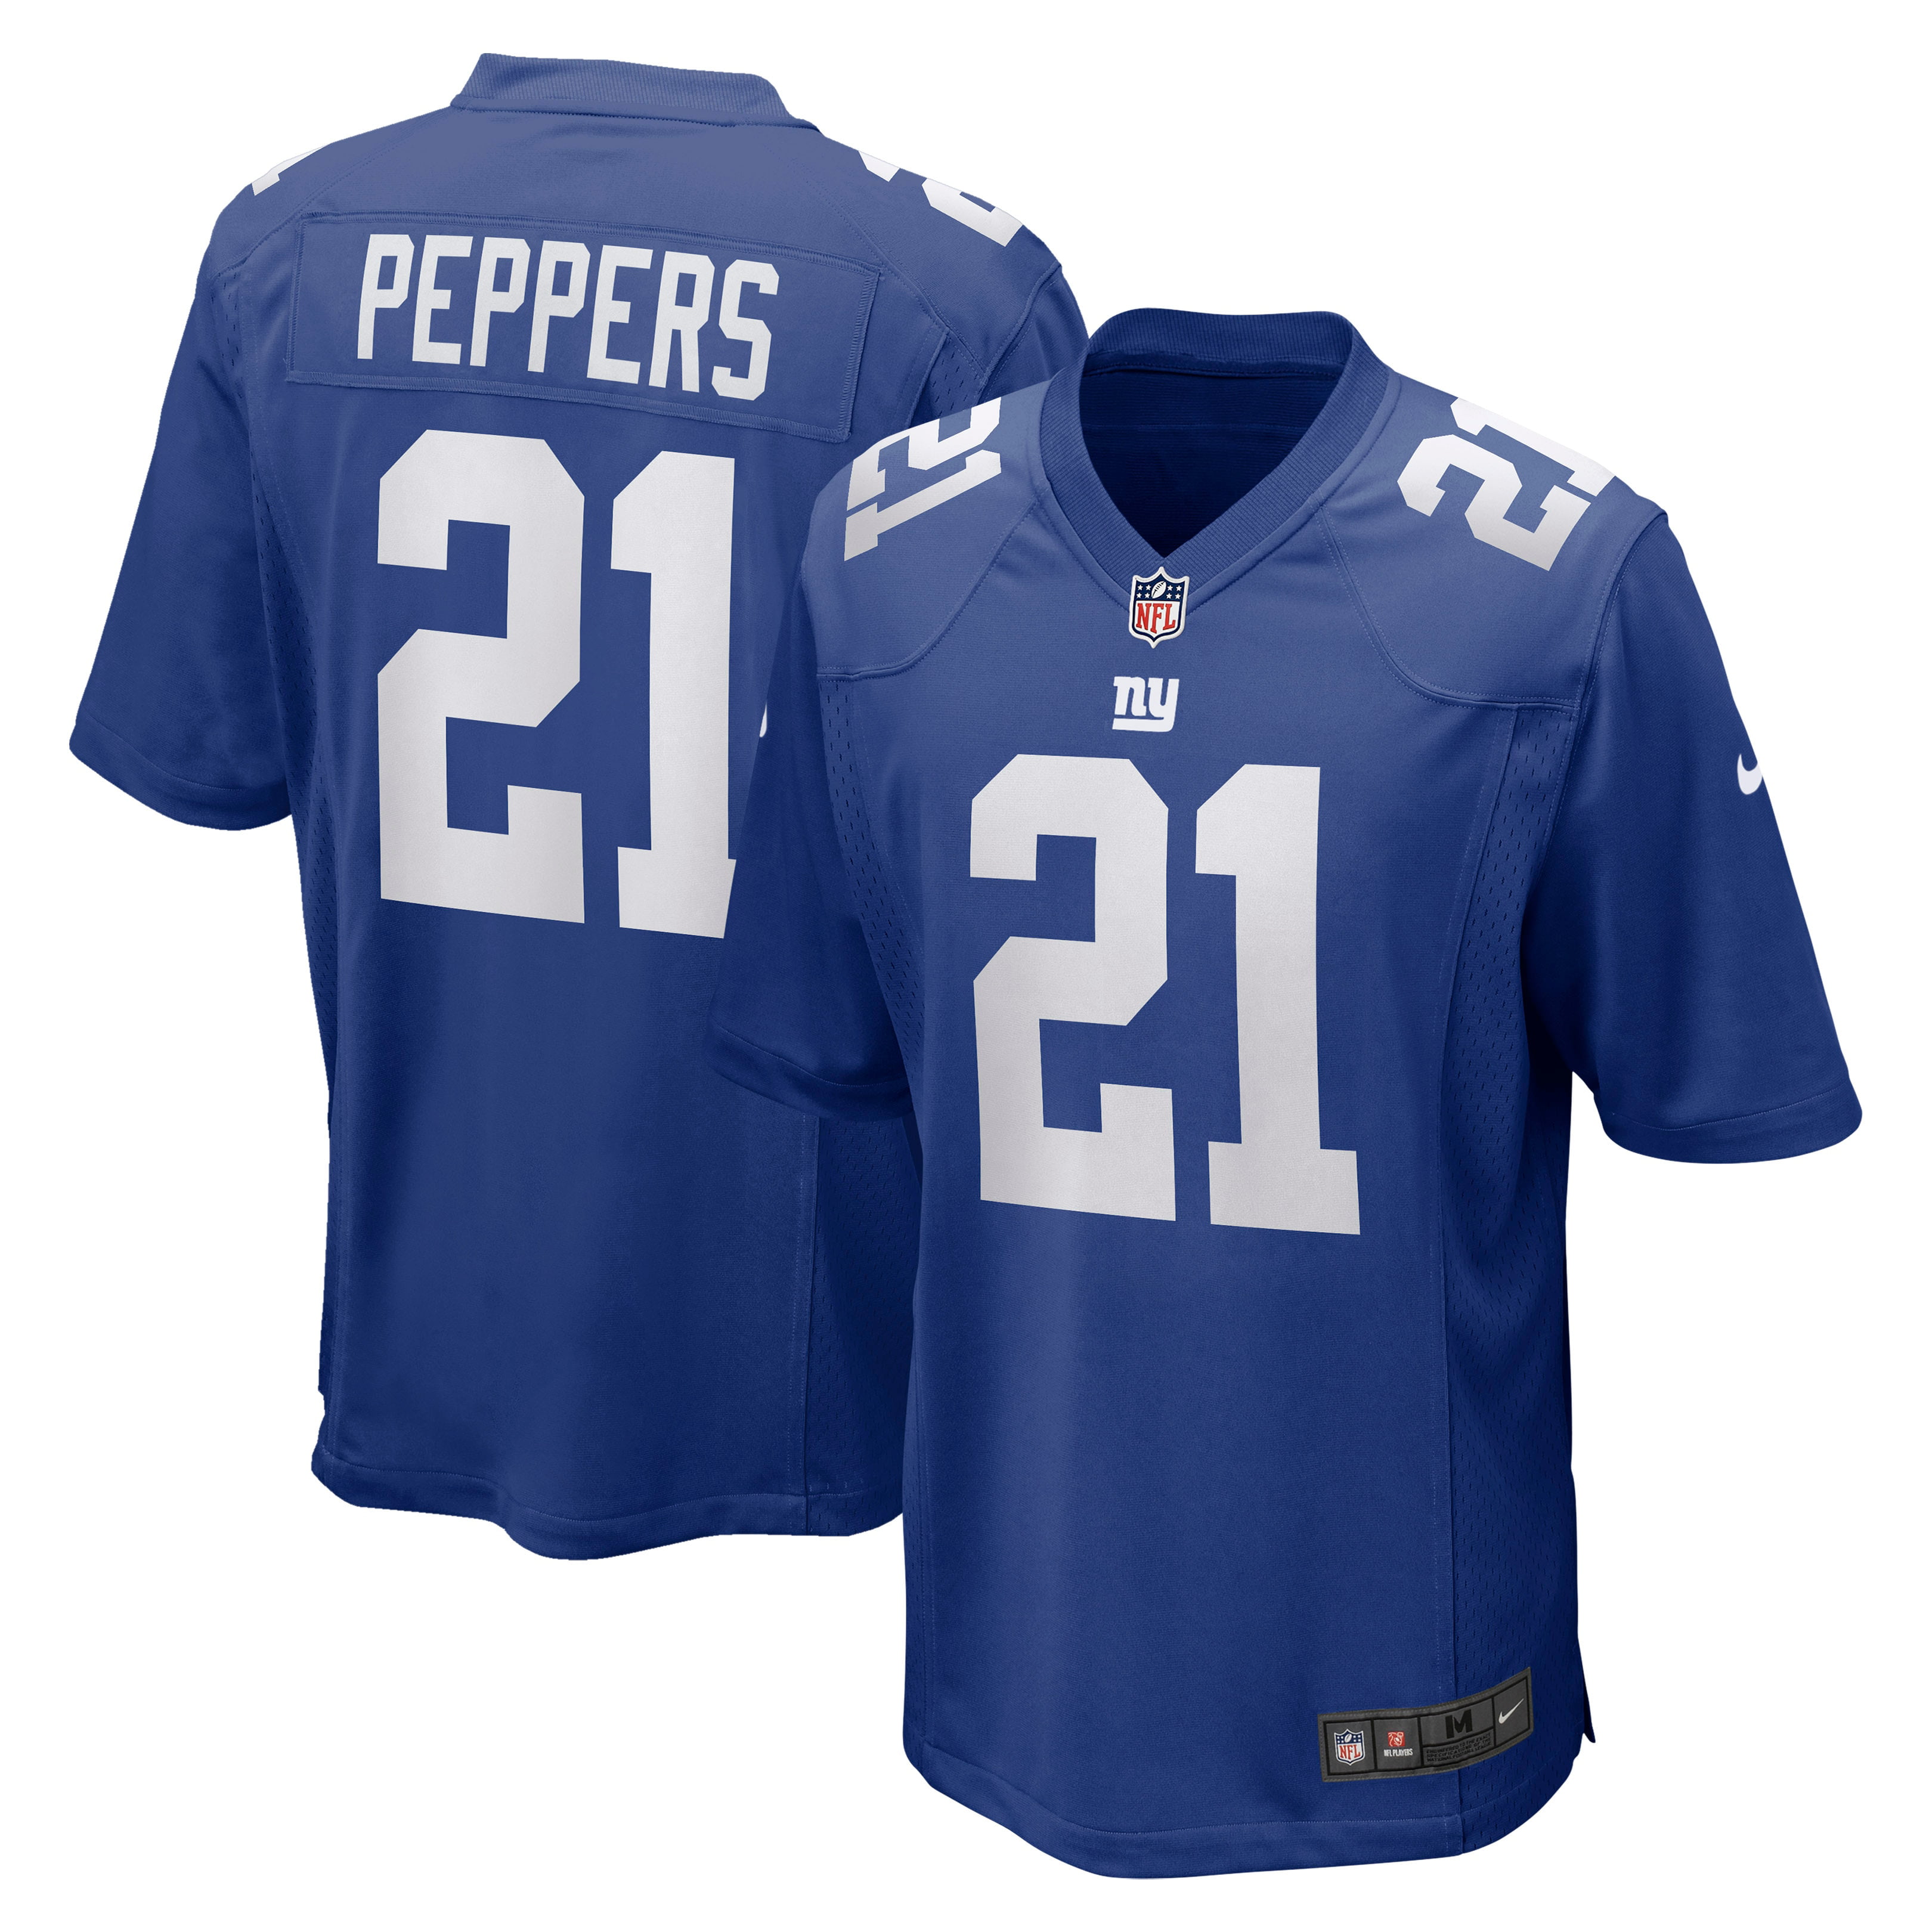 peppers giants jersey